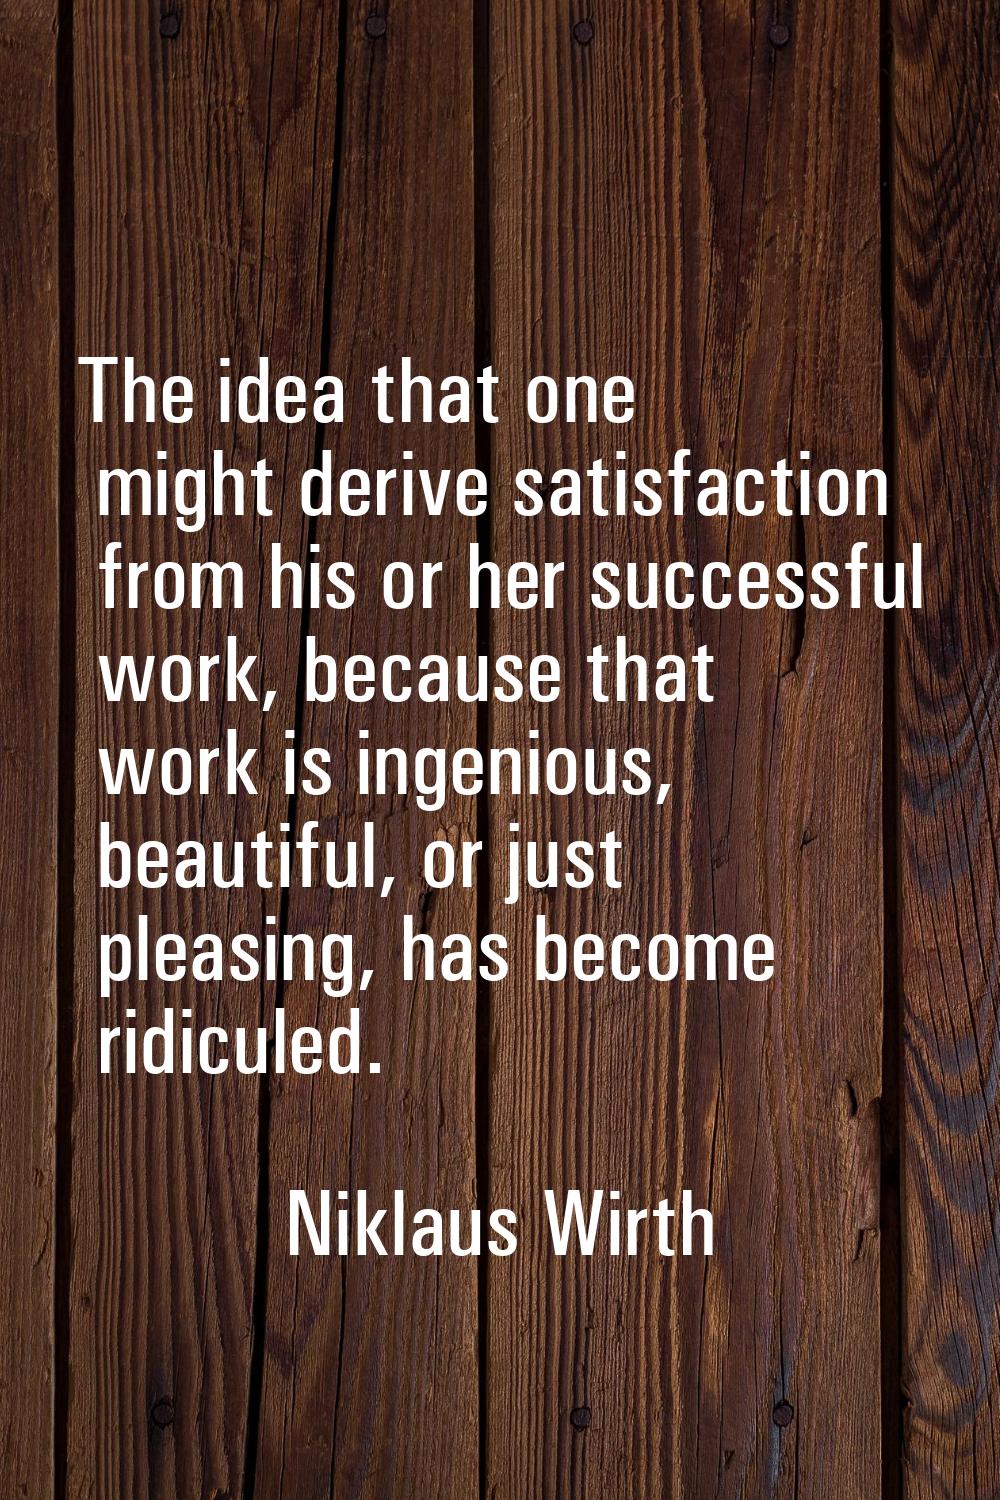 The idea that one might derive satisfaction from his or her successful work, because that work is i